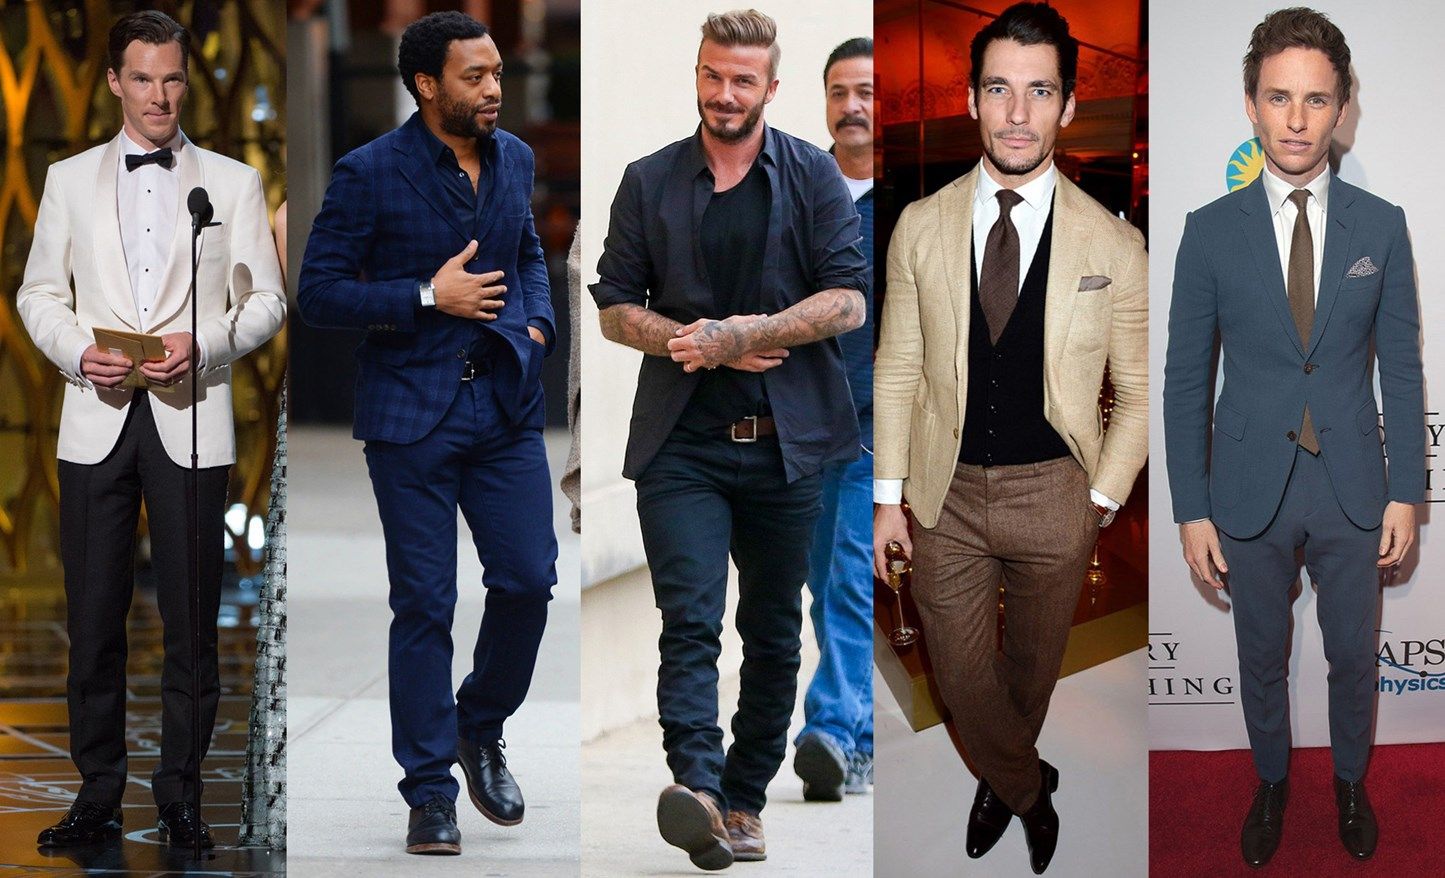 Menswear Essentials That Will Never Go Out of Style by GentWith Blog